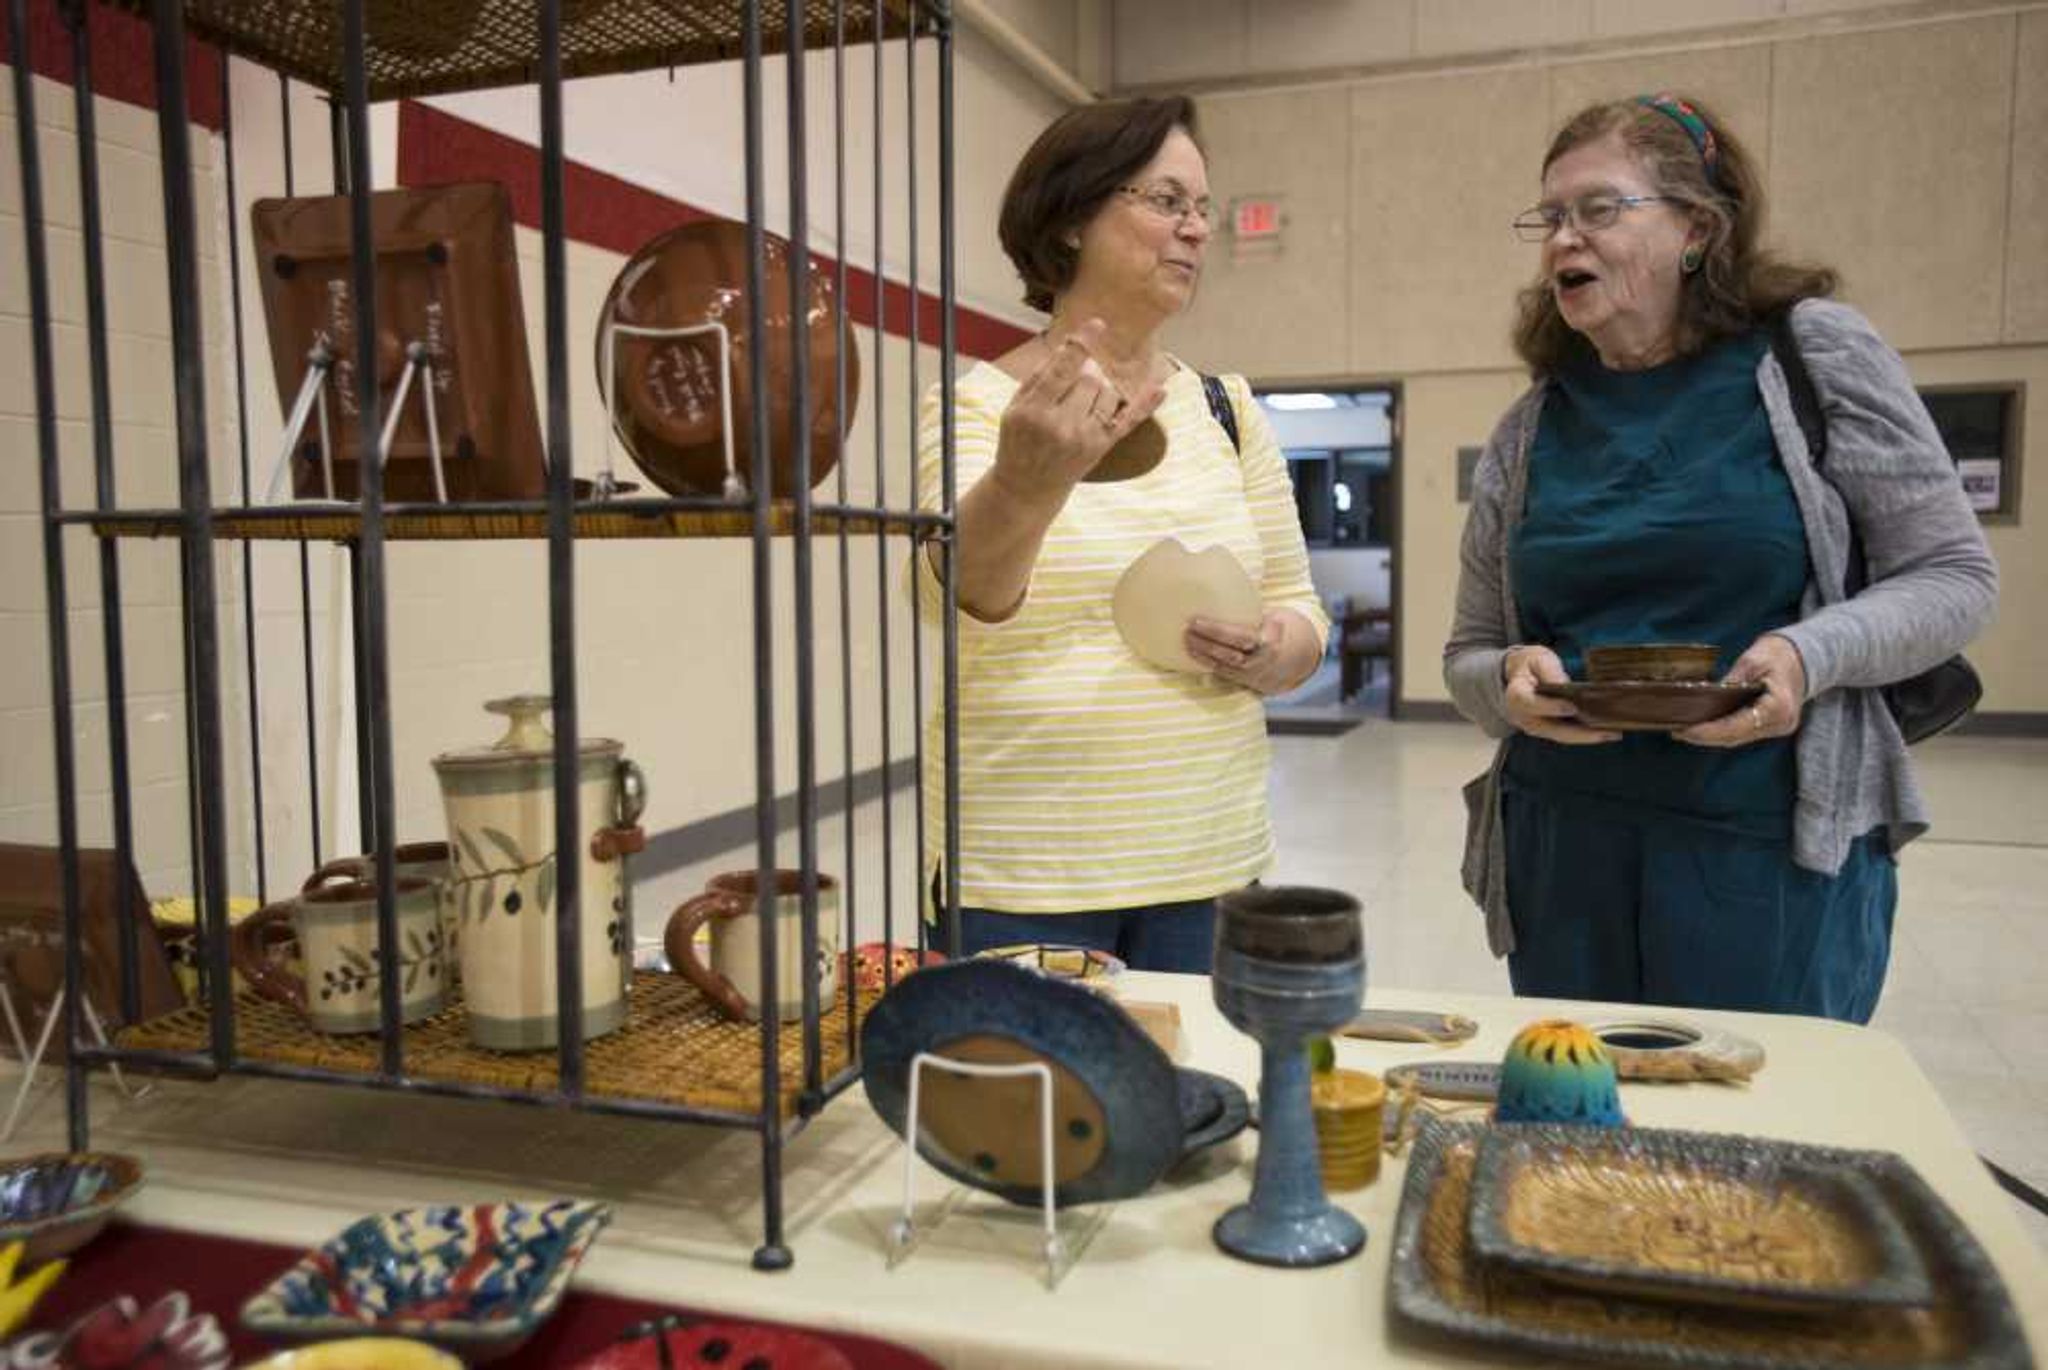 Avon Crocker, left, laughs with Marilou Shaner after reading an inscription on a bowl at an Empty Bowls Banquet on Sunday at the Salvation Army in Cape Girardeau.